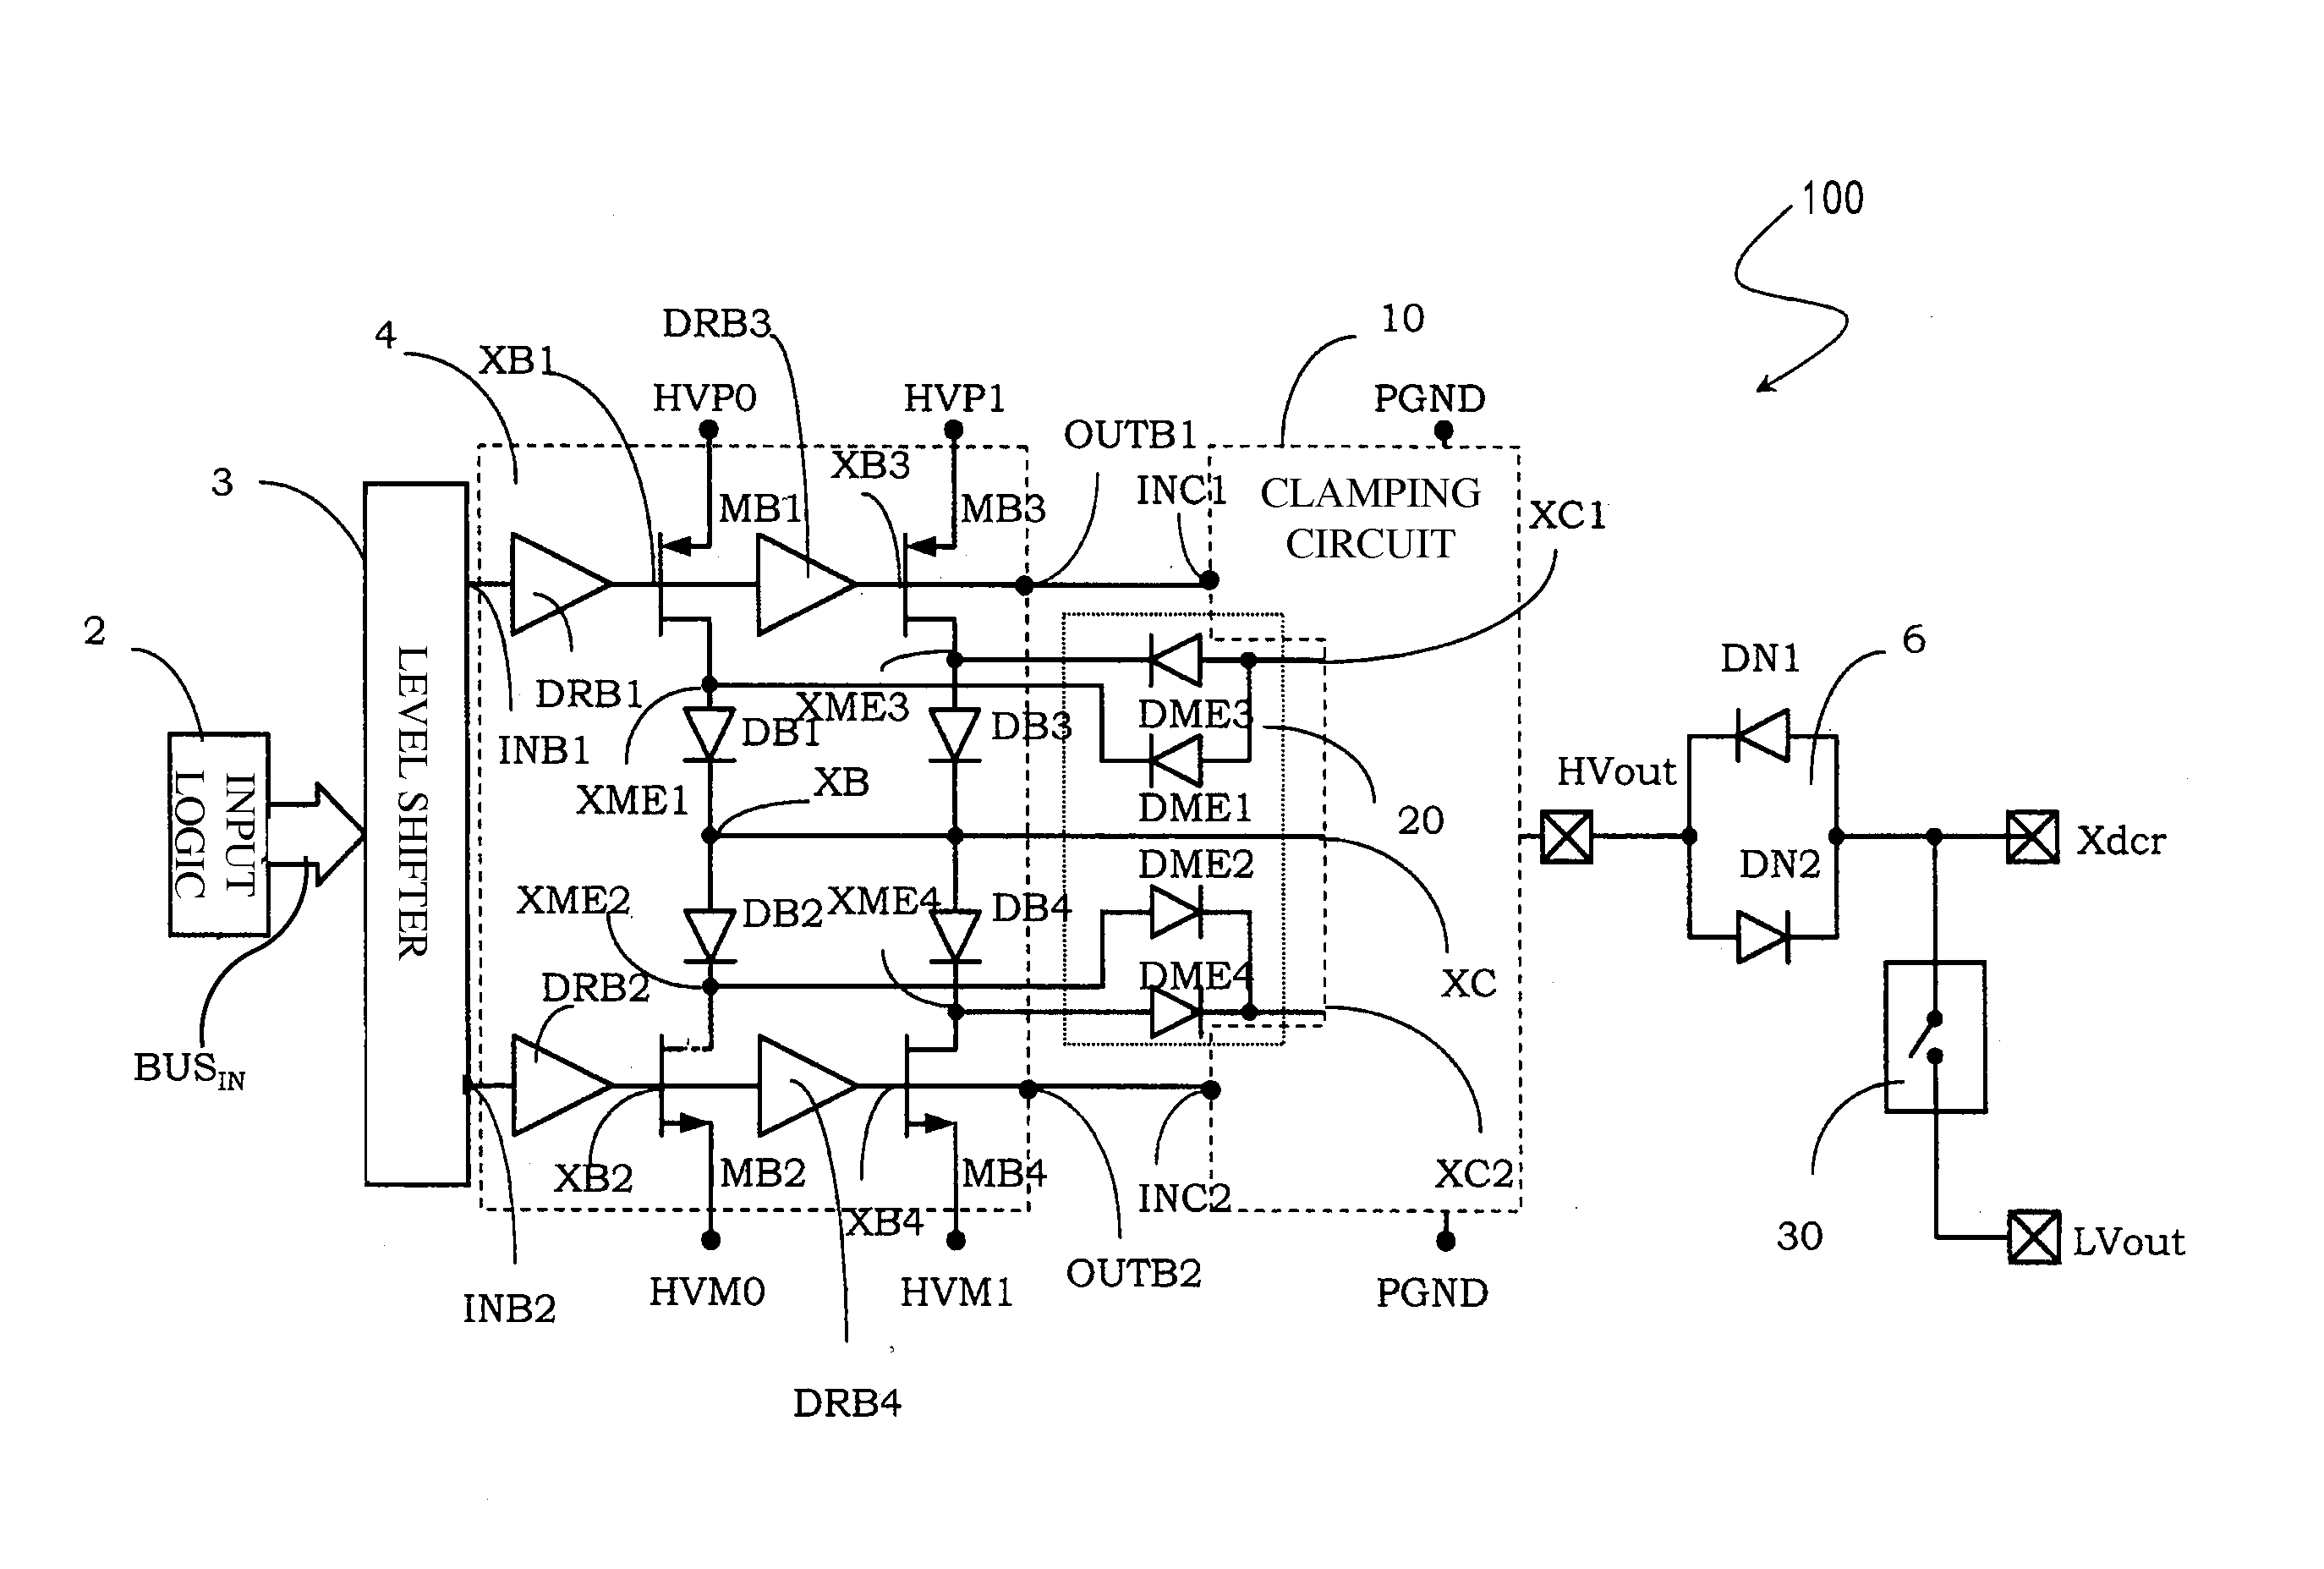 Transmission channel for ultrasound applications